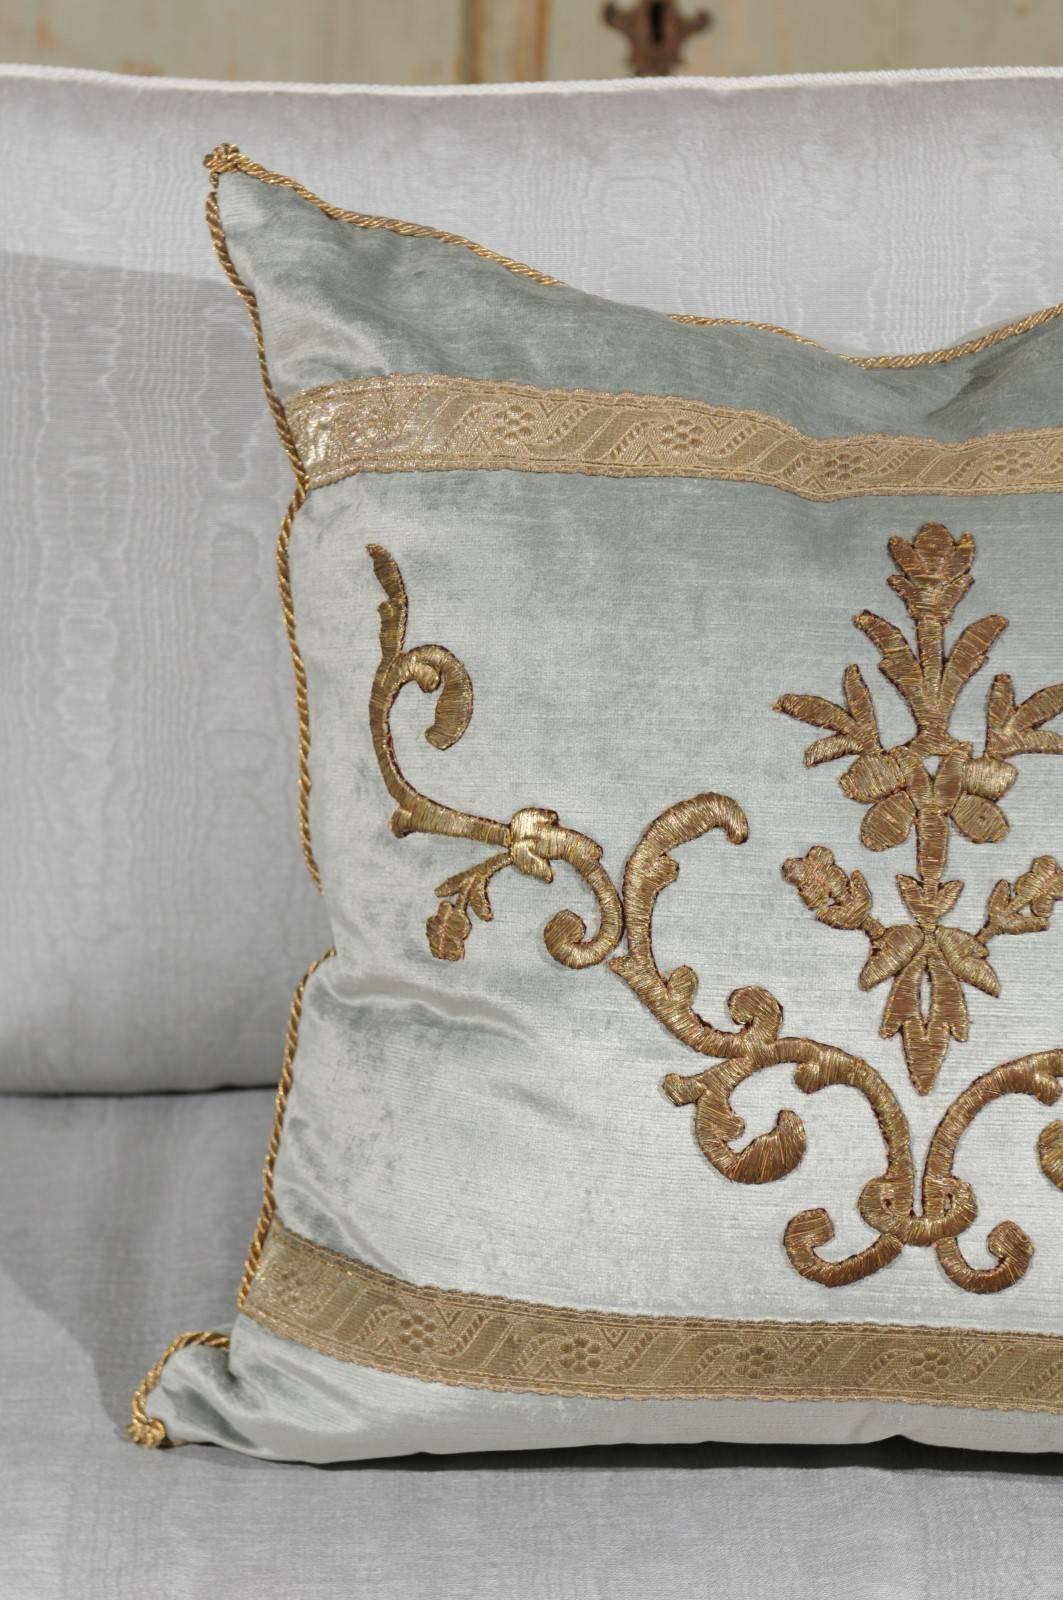 Pale French Blue Velvet Pillow Made of Ottoman Empire Gold Metallic Embroidery 1